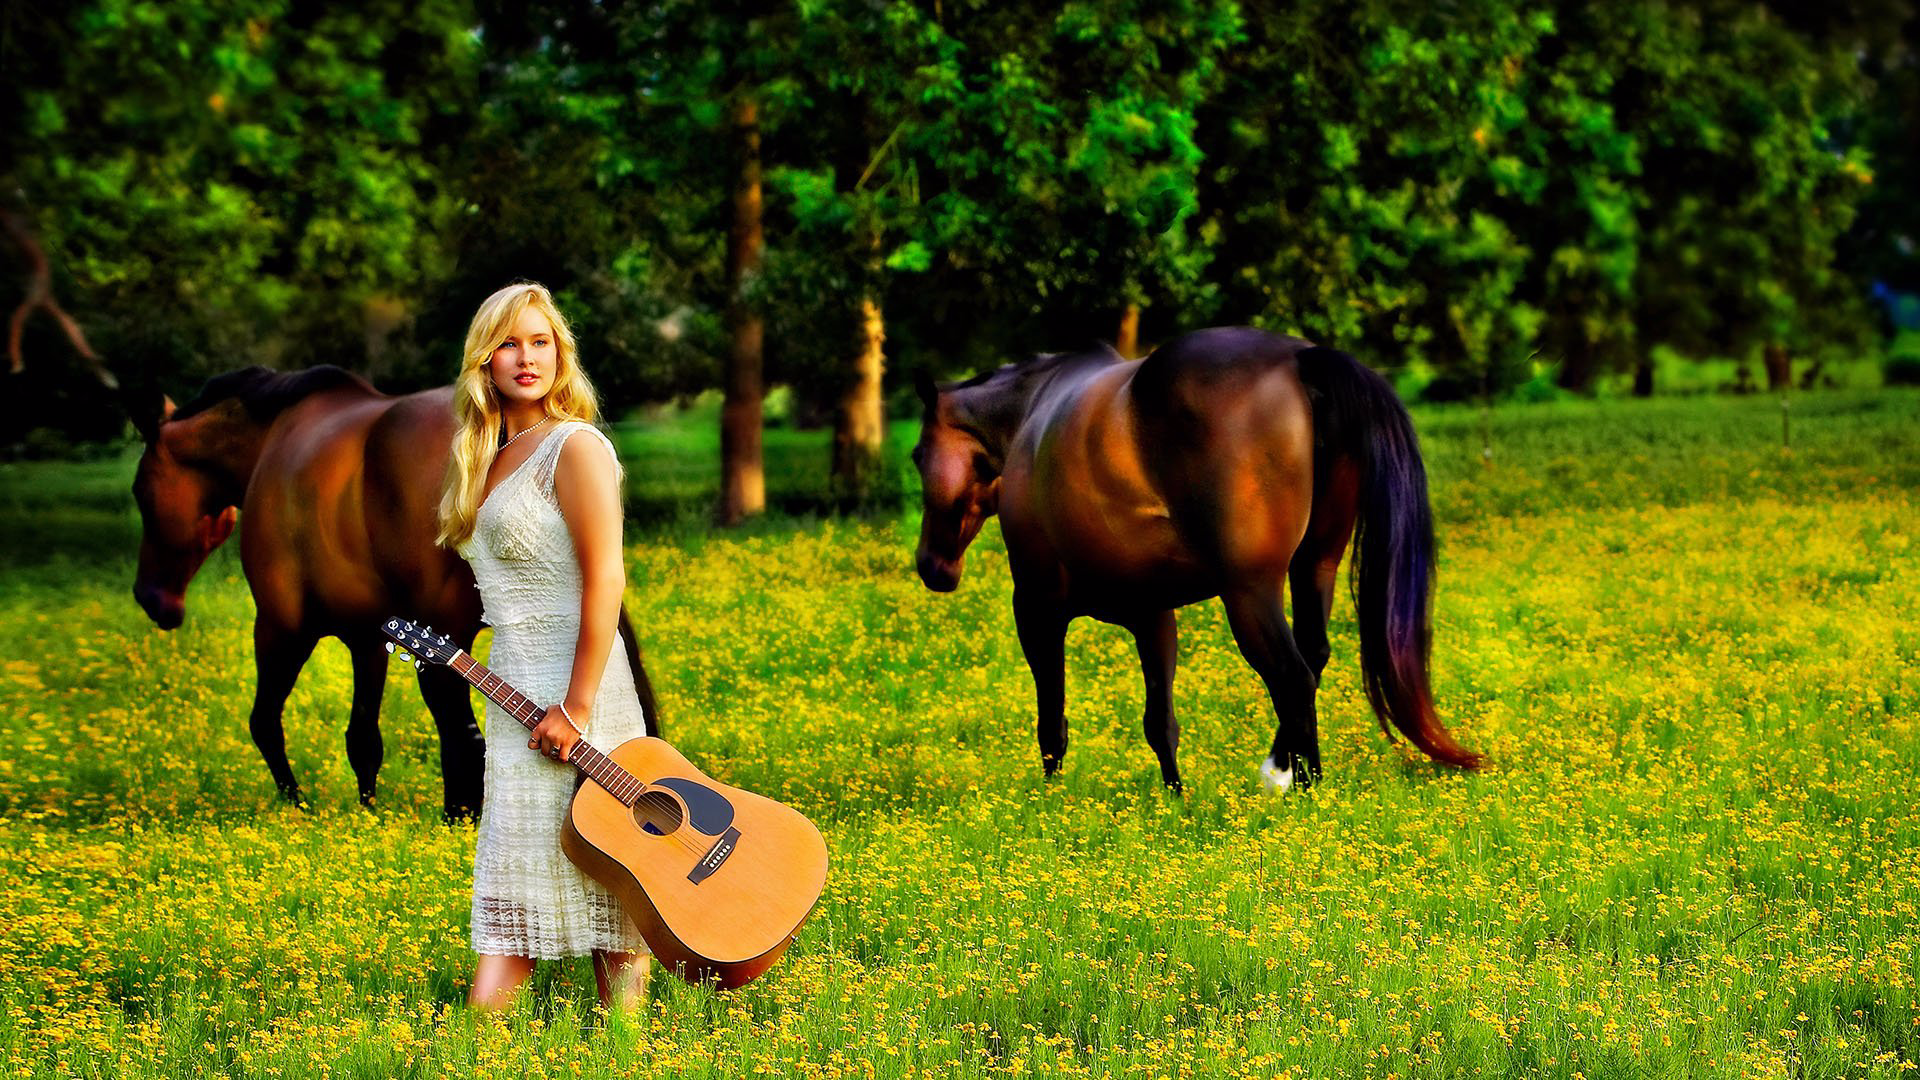 A woman in a white dress is holding a guitar in a field with two horses.